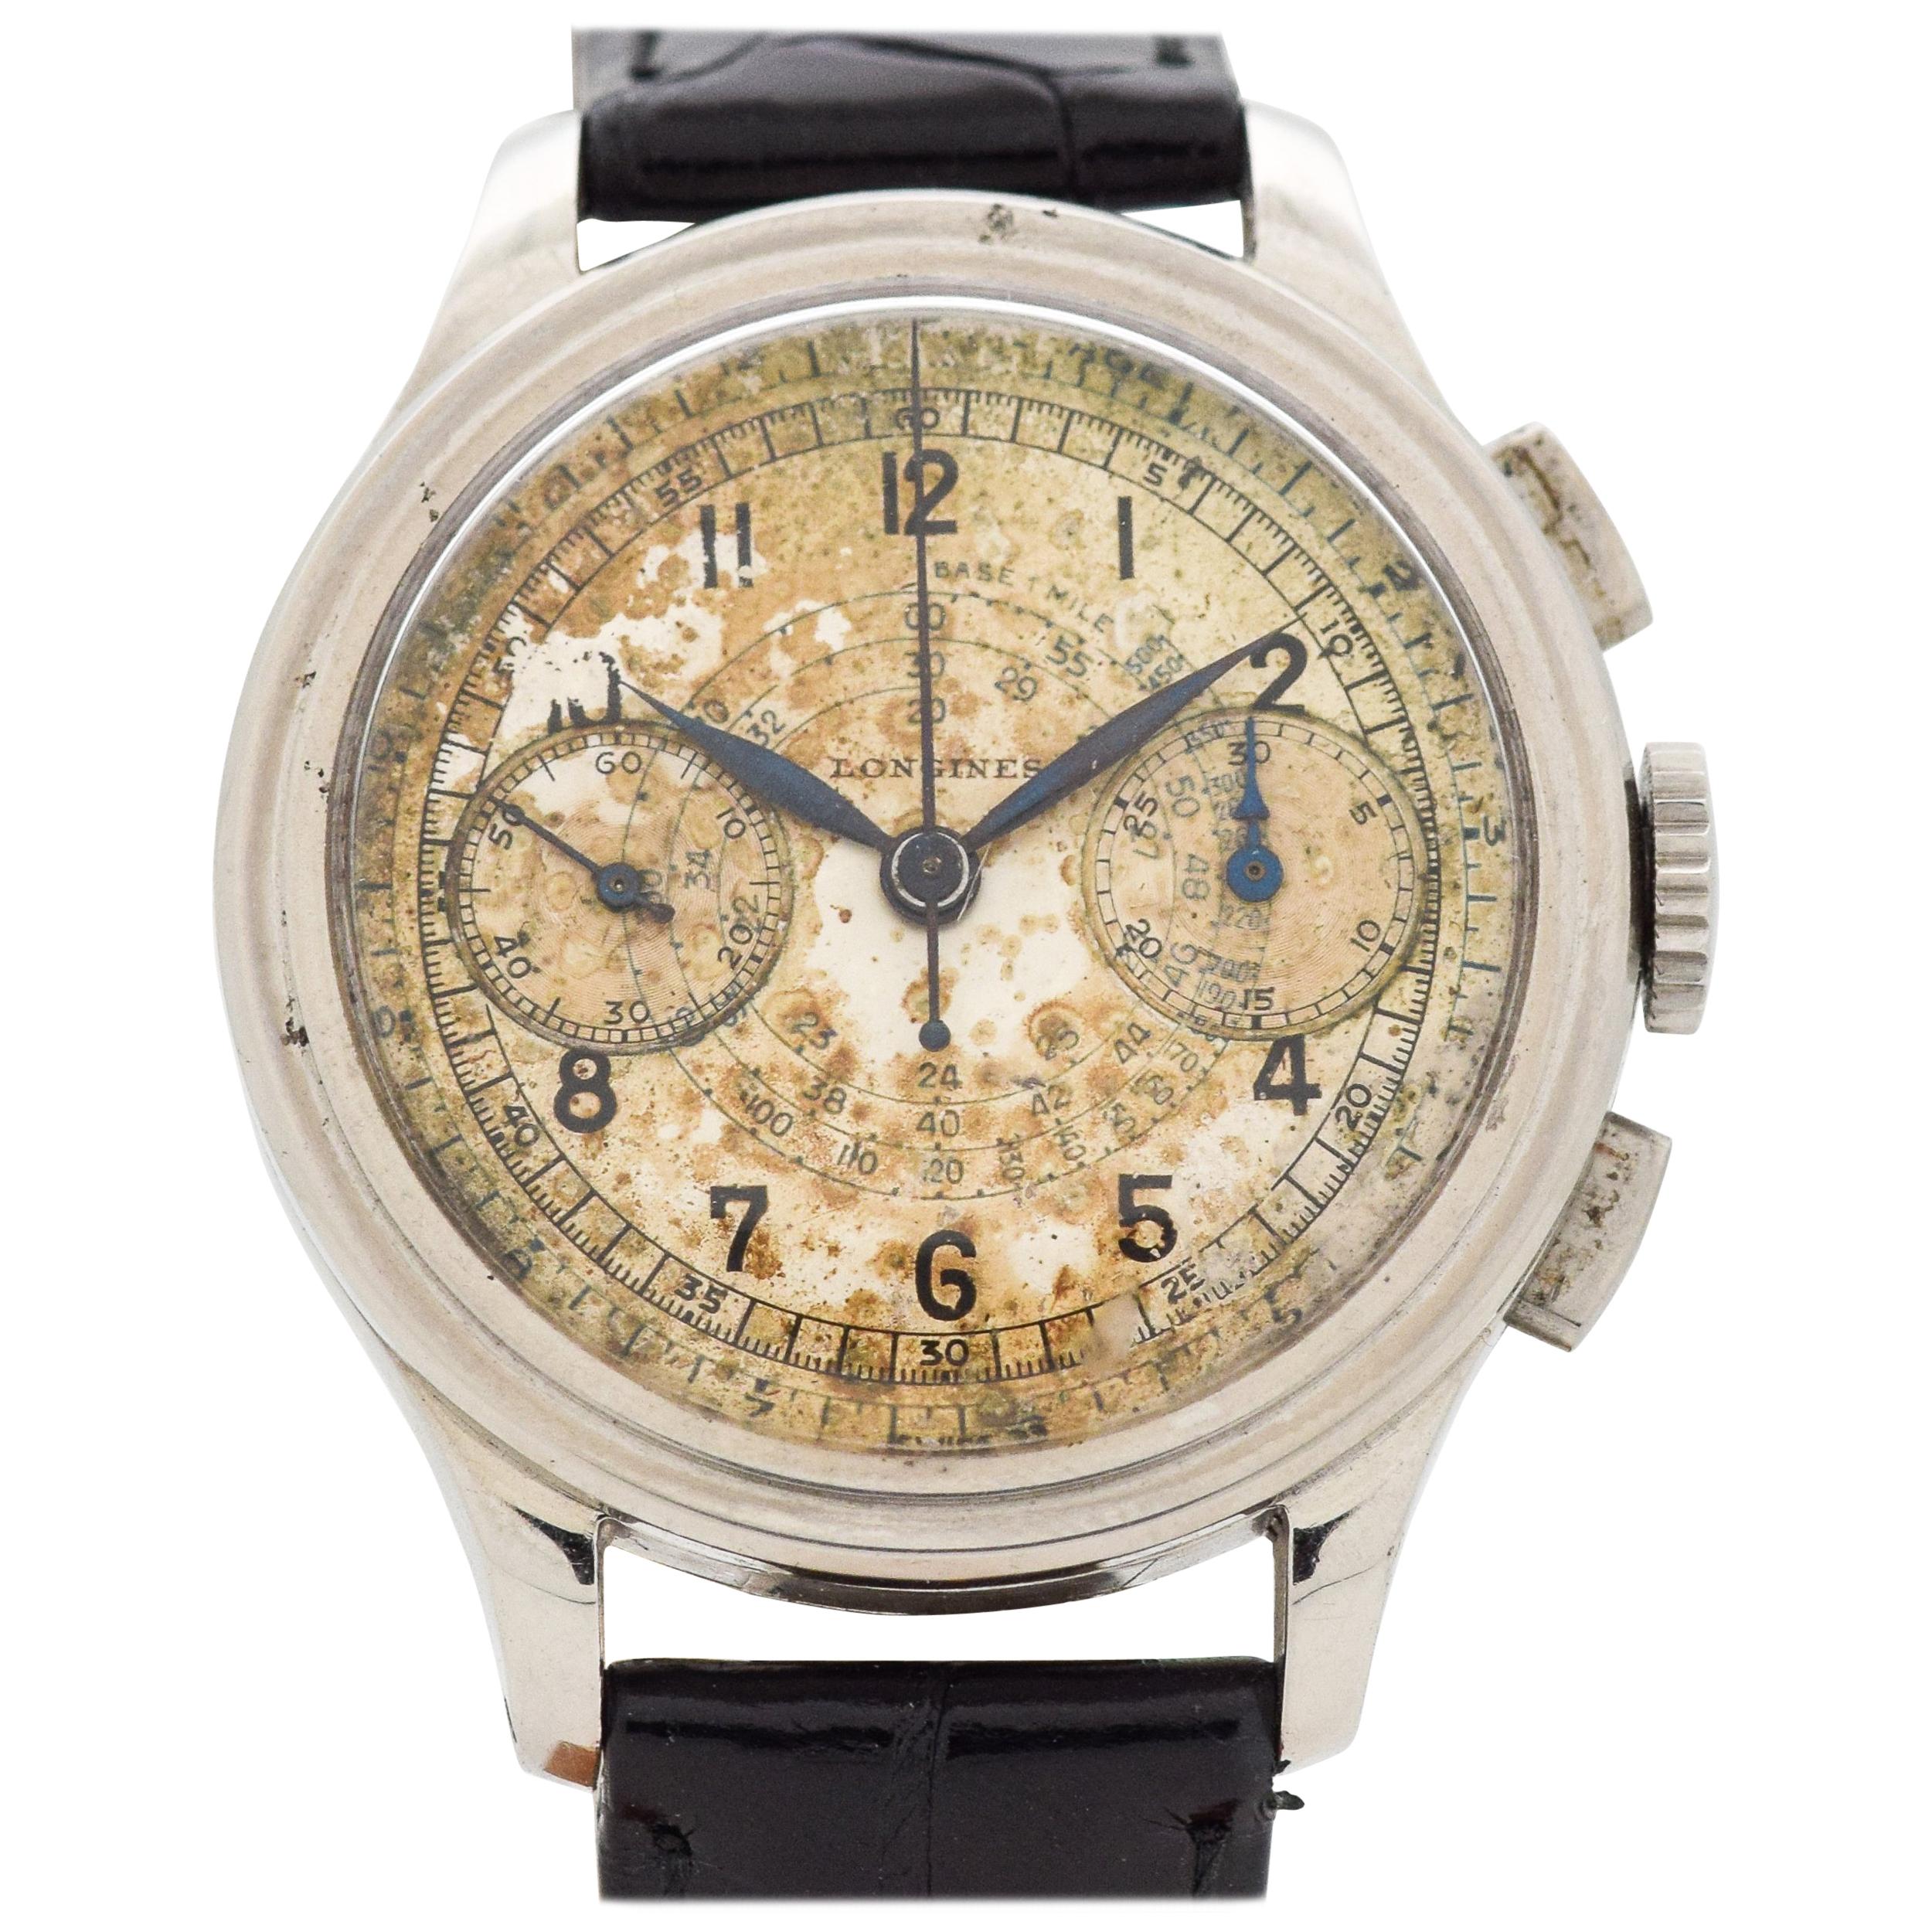 Vintage Longines 13ZN Chronograph Stainless Steel Watch, 1939 im Angebot